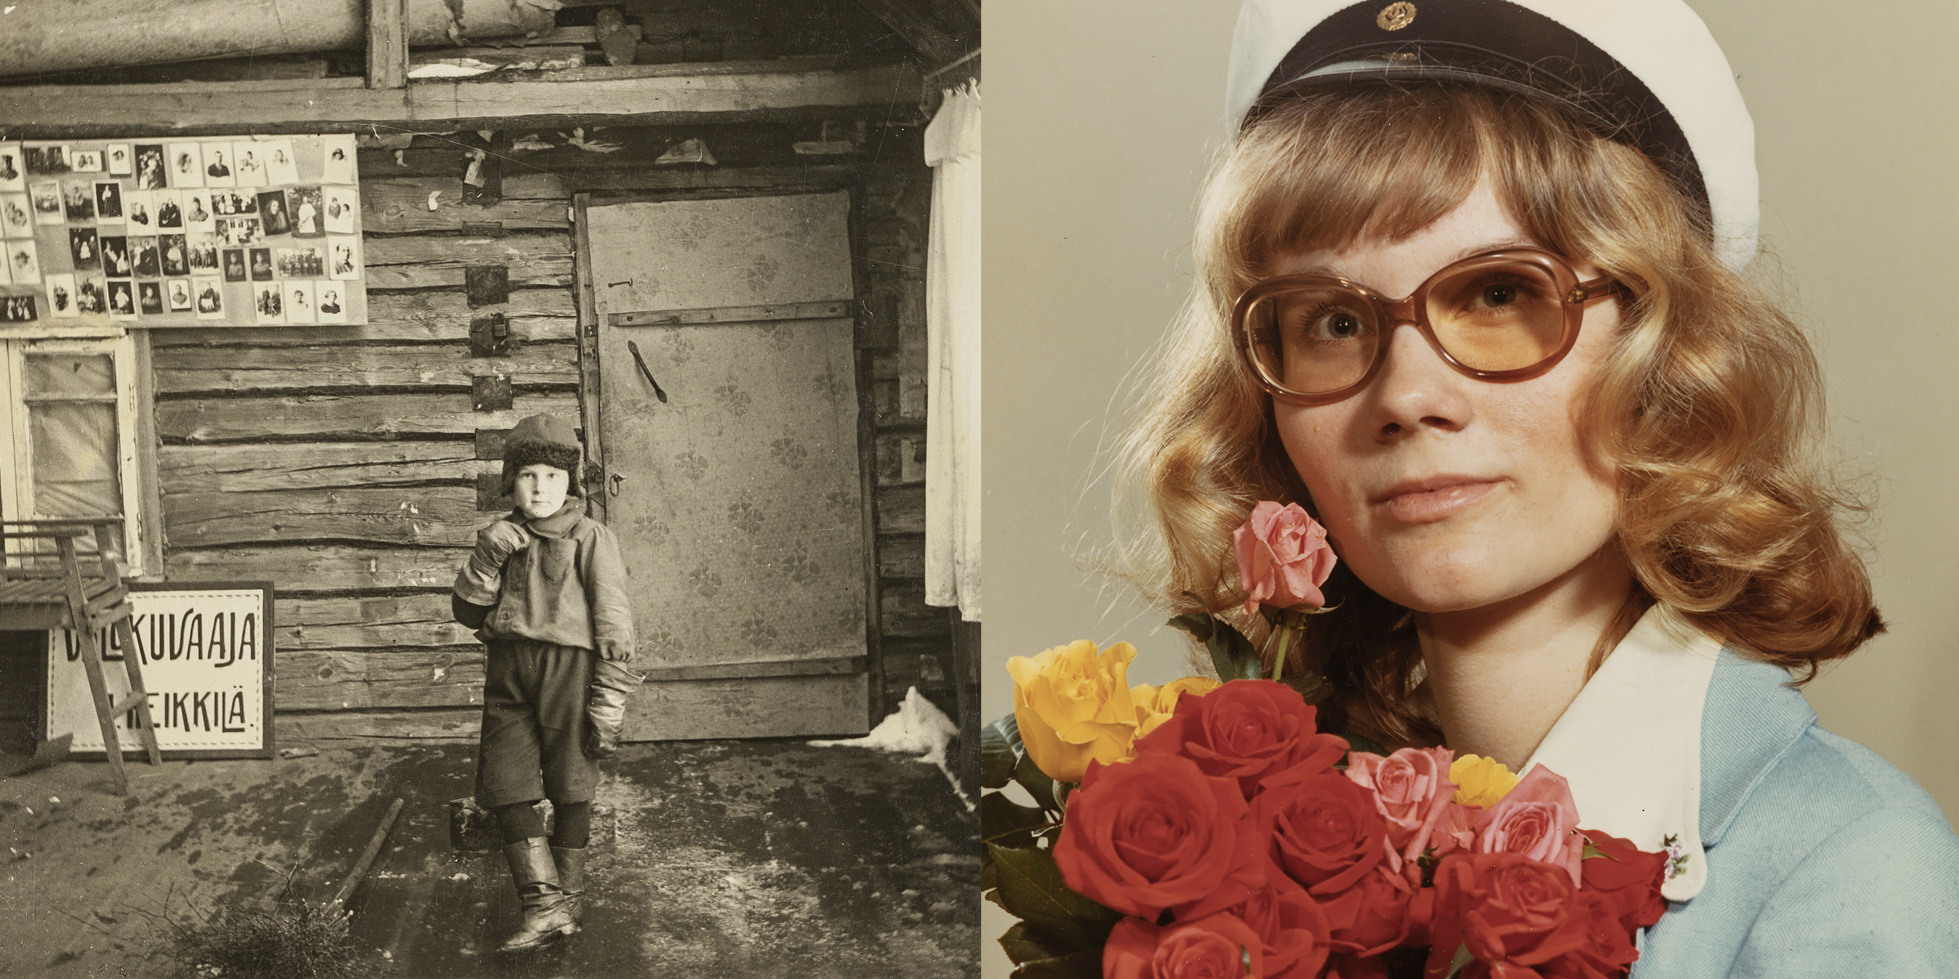 Two images: a boy in a simple studio setting and a portrait of a lady with roses.